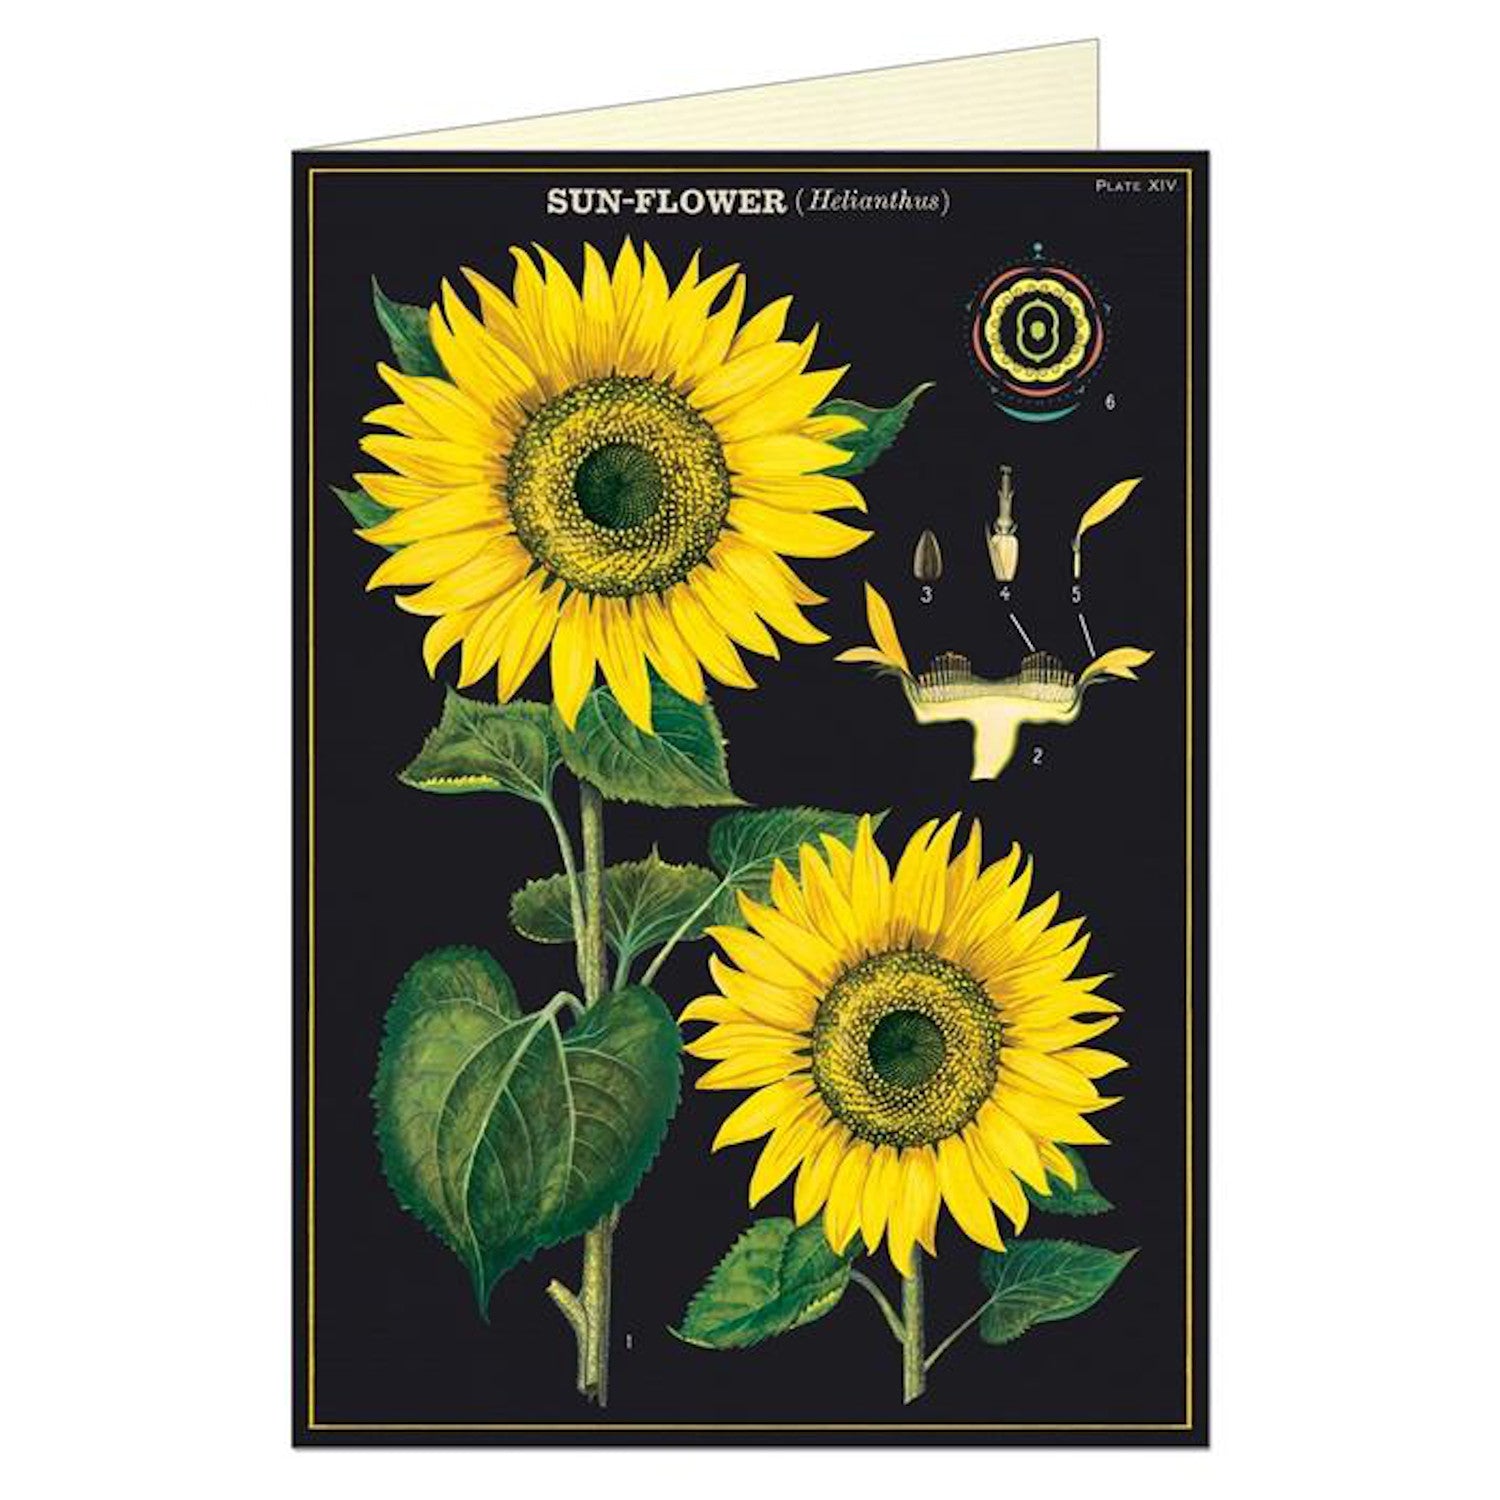 Vintage botanical illustration of sunflowers with detailed parts labeled, on Italian paper by Cavallini Papers &amp; Co Sunflower Card.